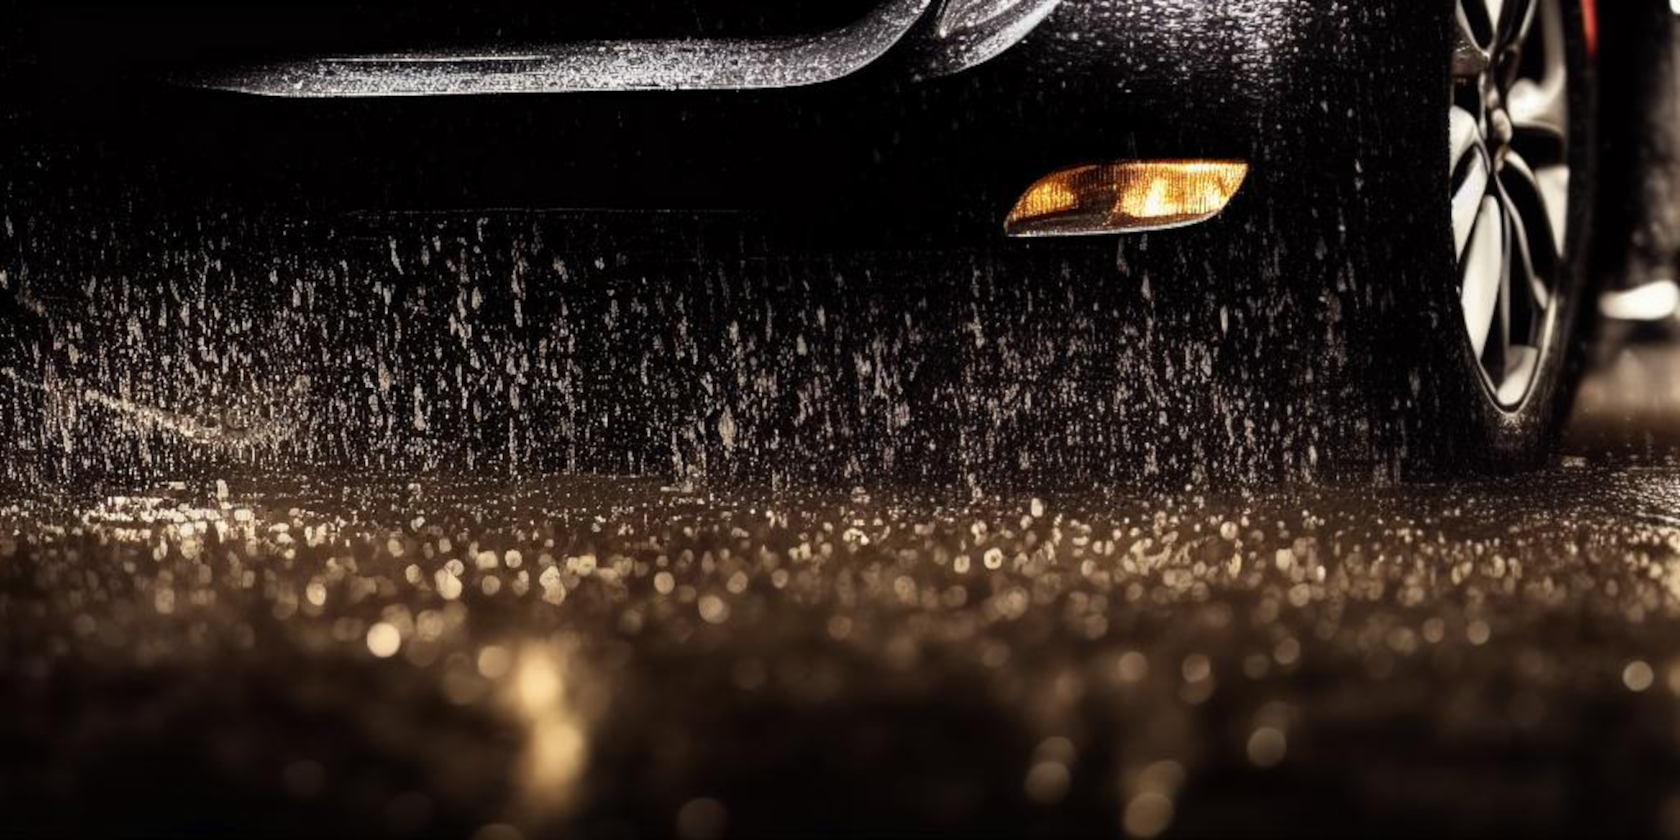 closeup image from ground level of the front of a car and one tyre in heavy rain at night